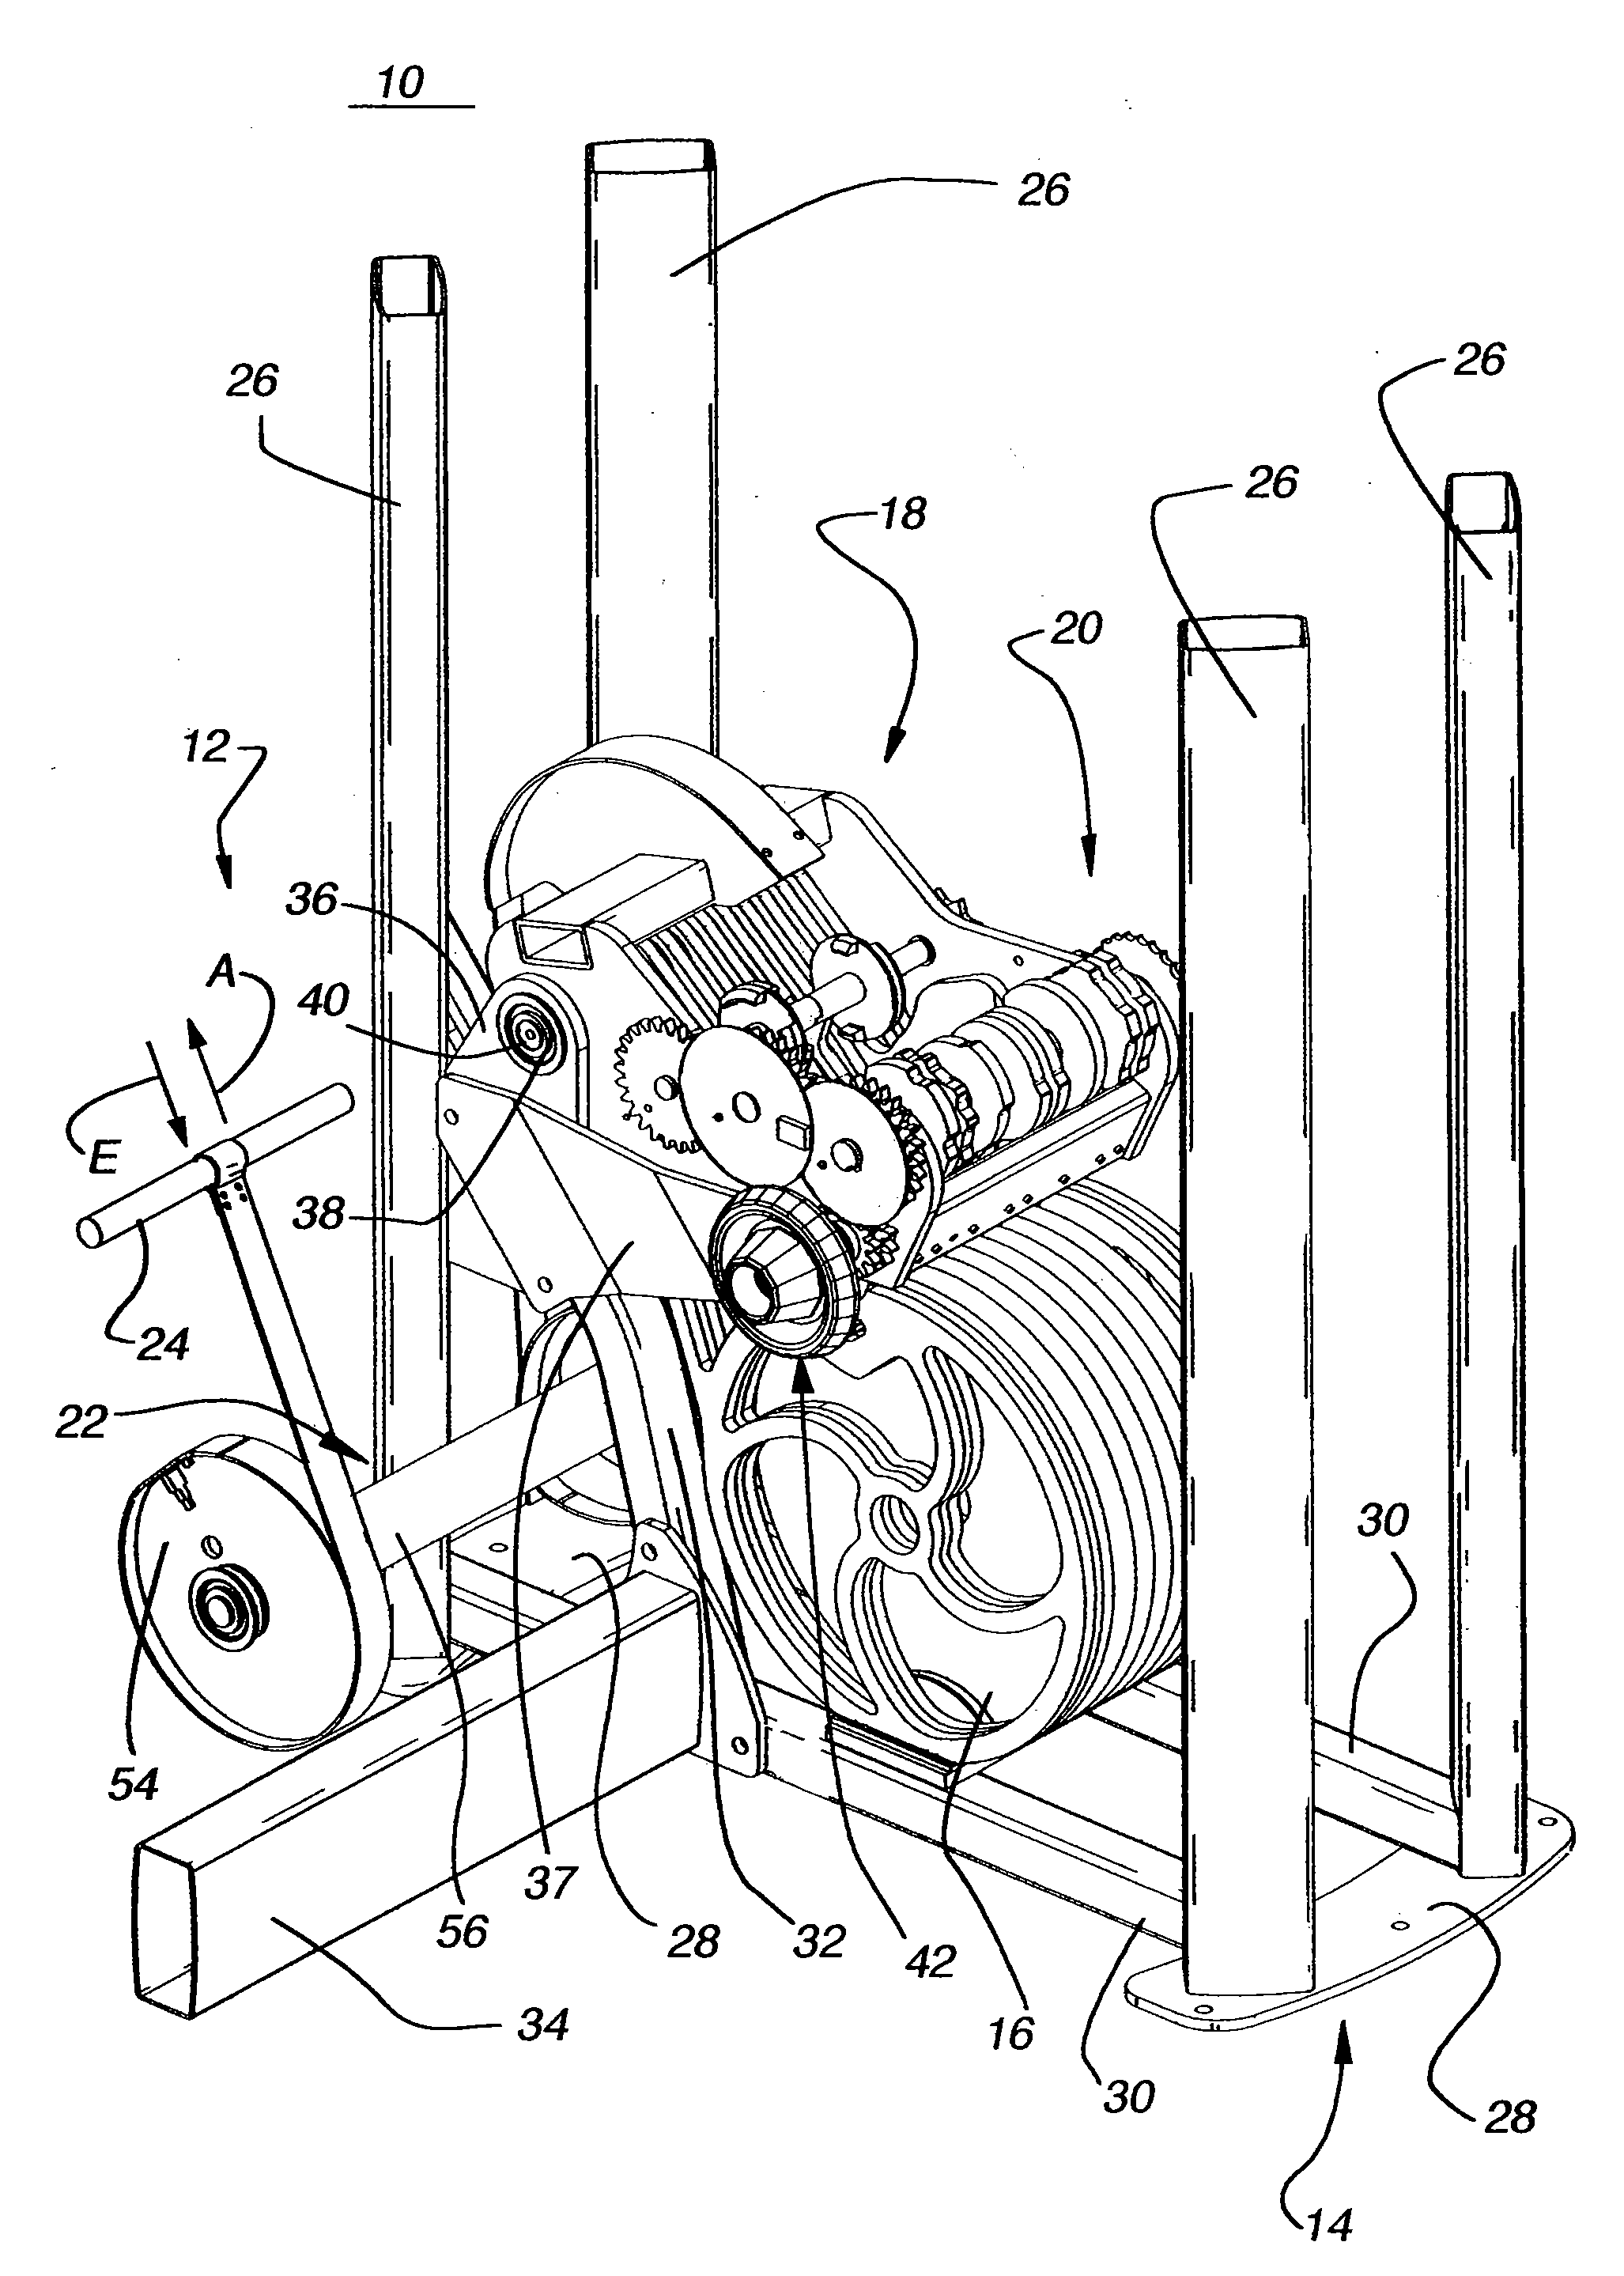 Exercise machine having rotatable weight selection index